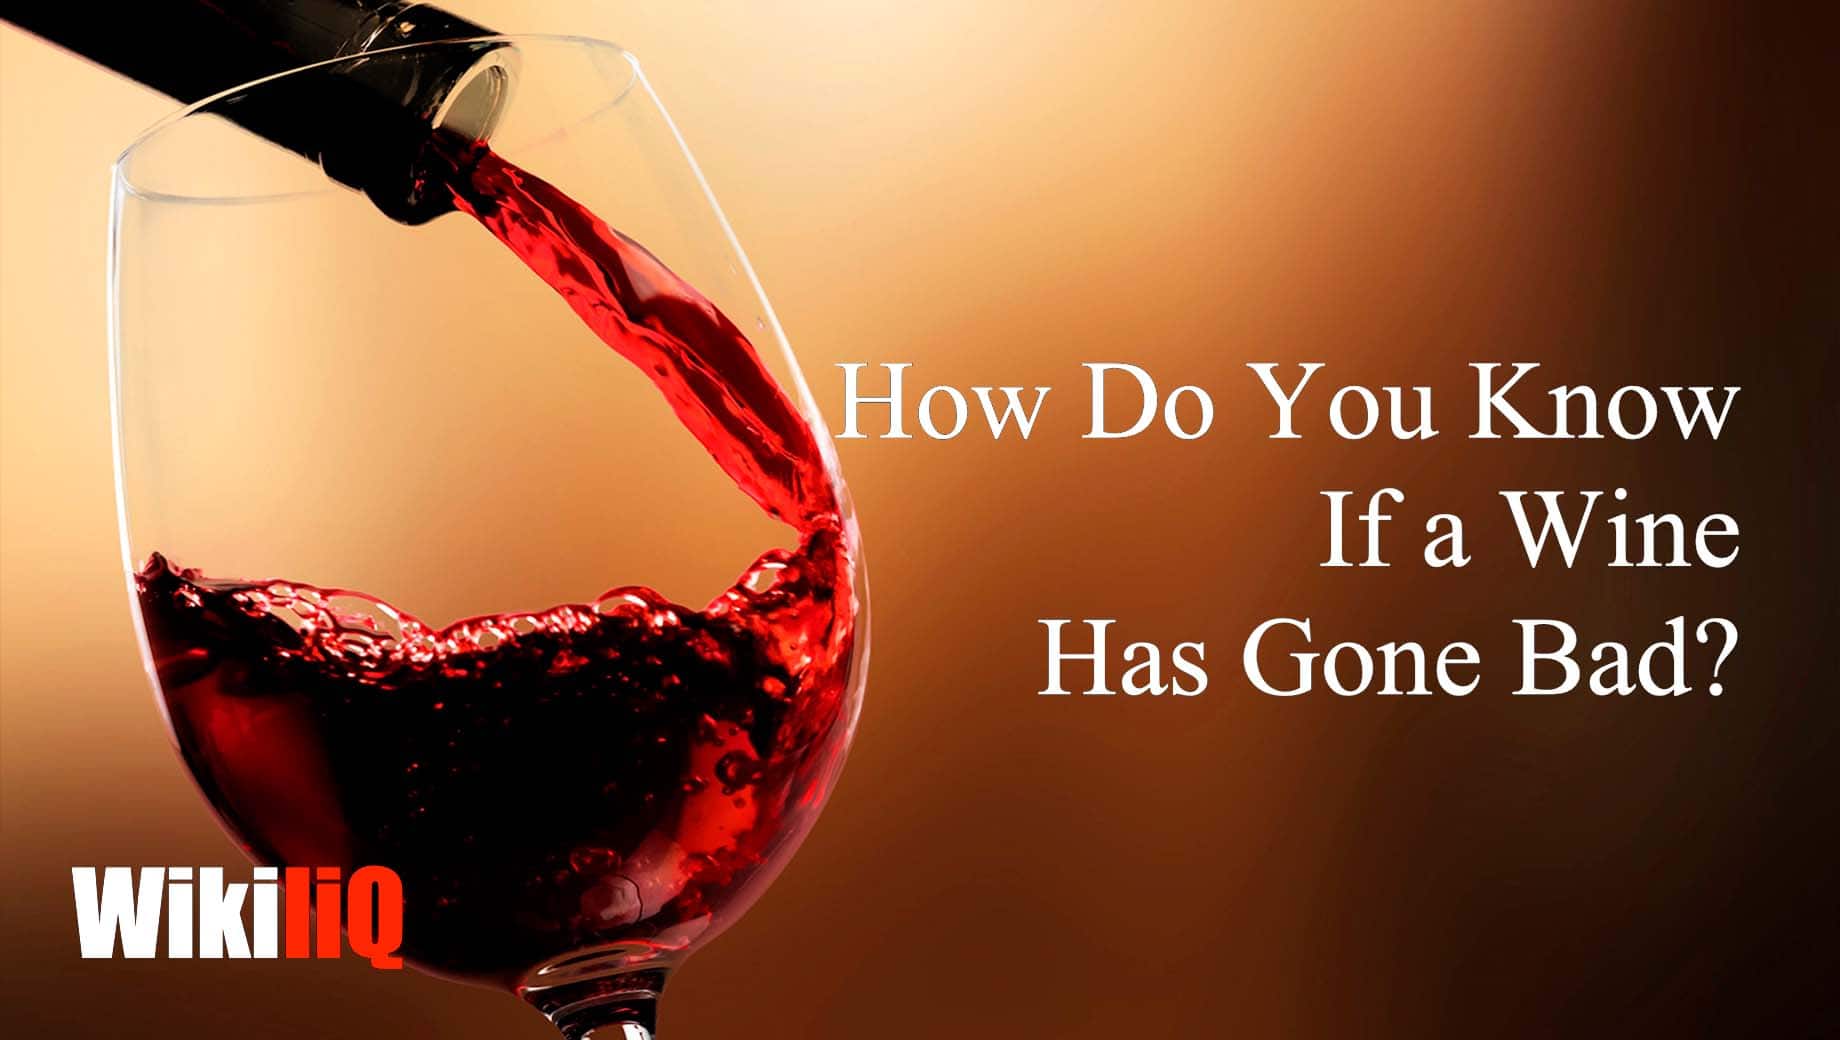 >How to Know if Wine Has Gone Bad